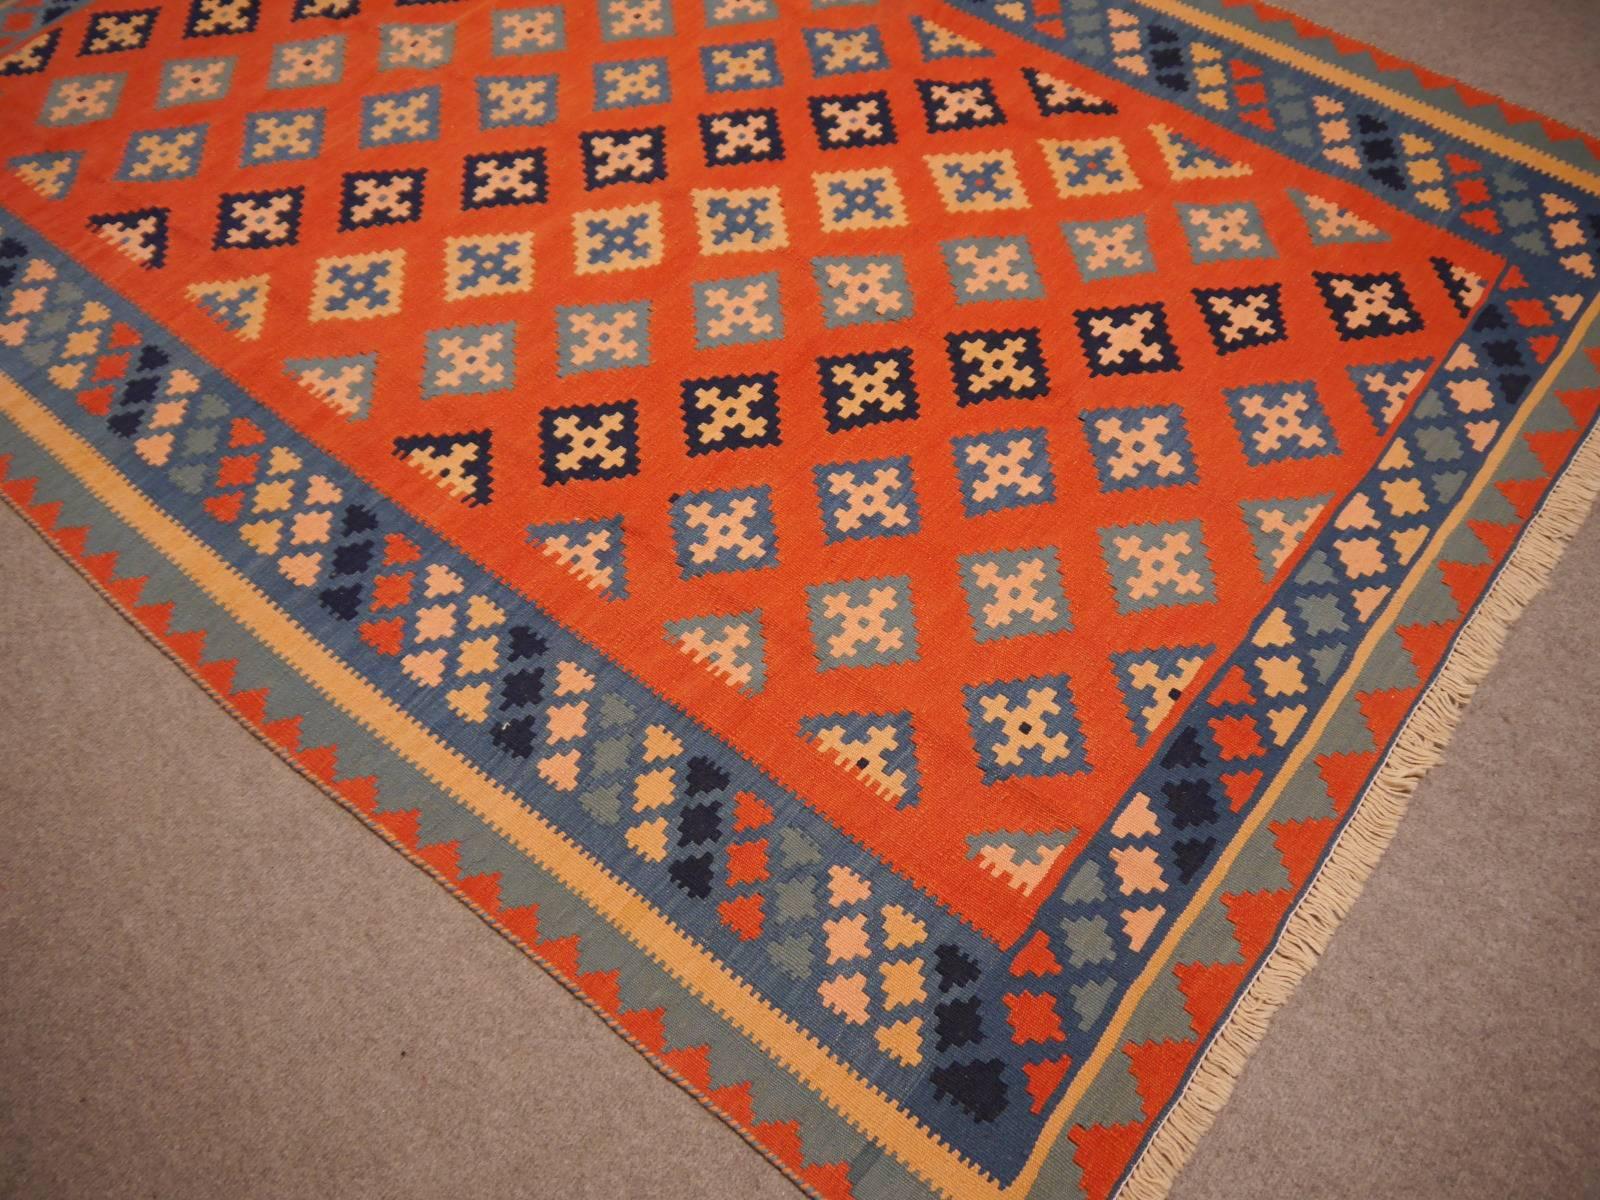 Hand-Woven Persian Rug Kilim Handwoven with Natural Dyed Organic Wool, Vintage